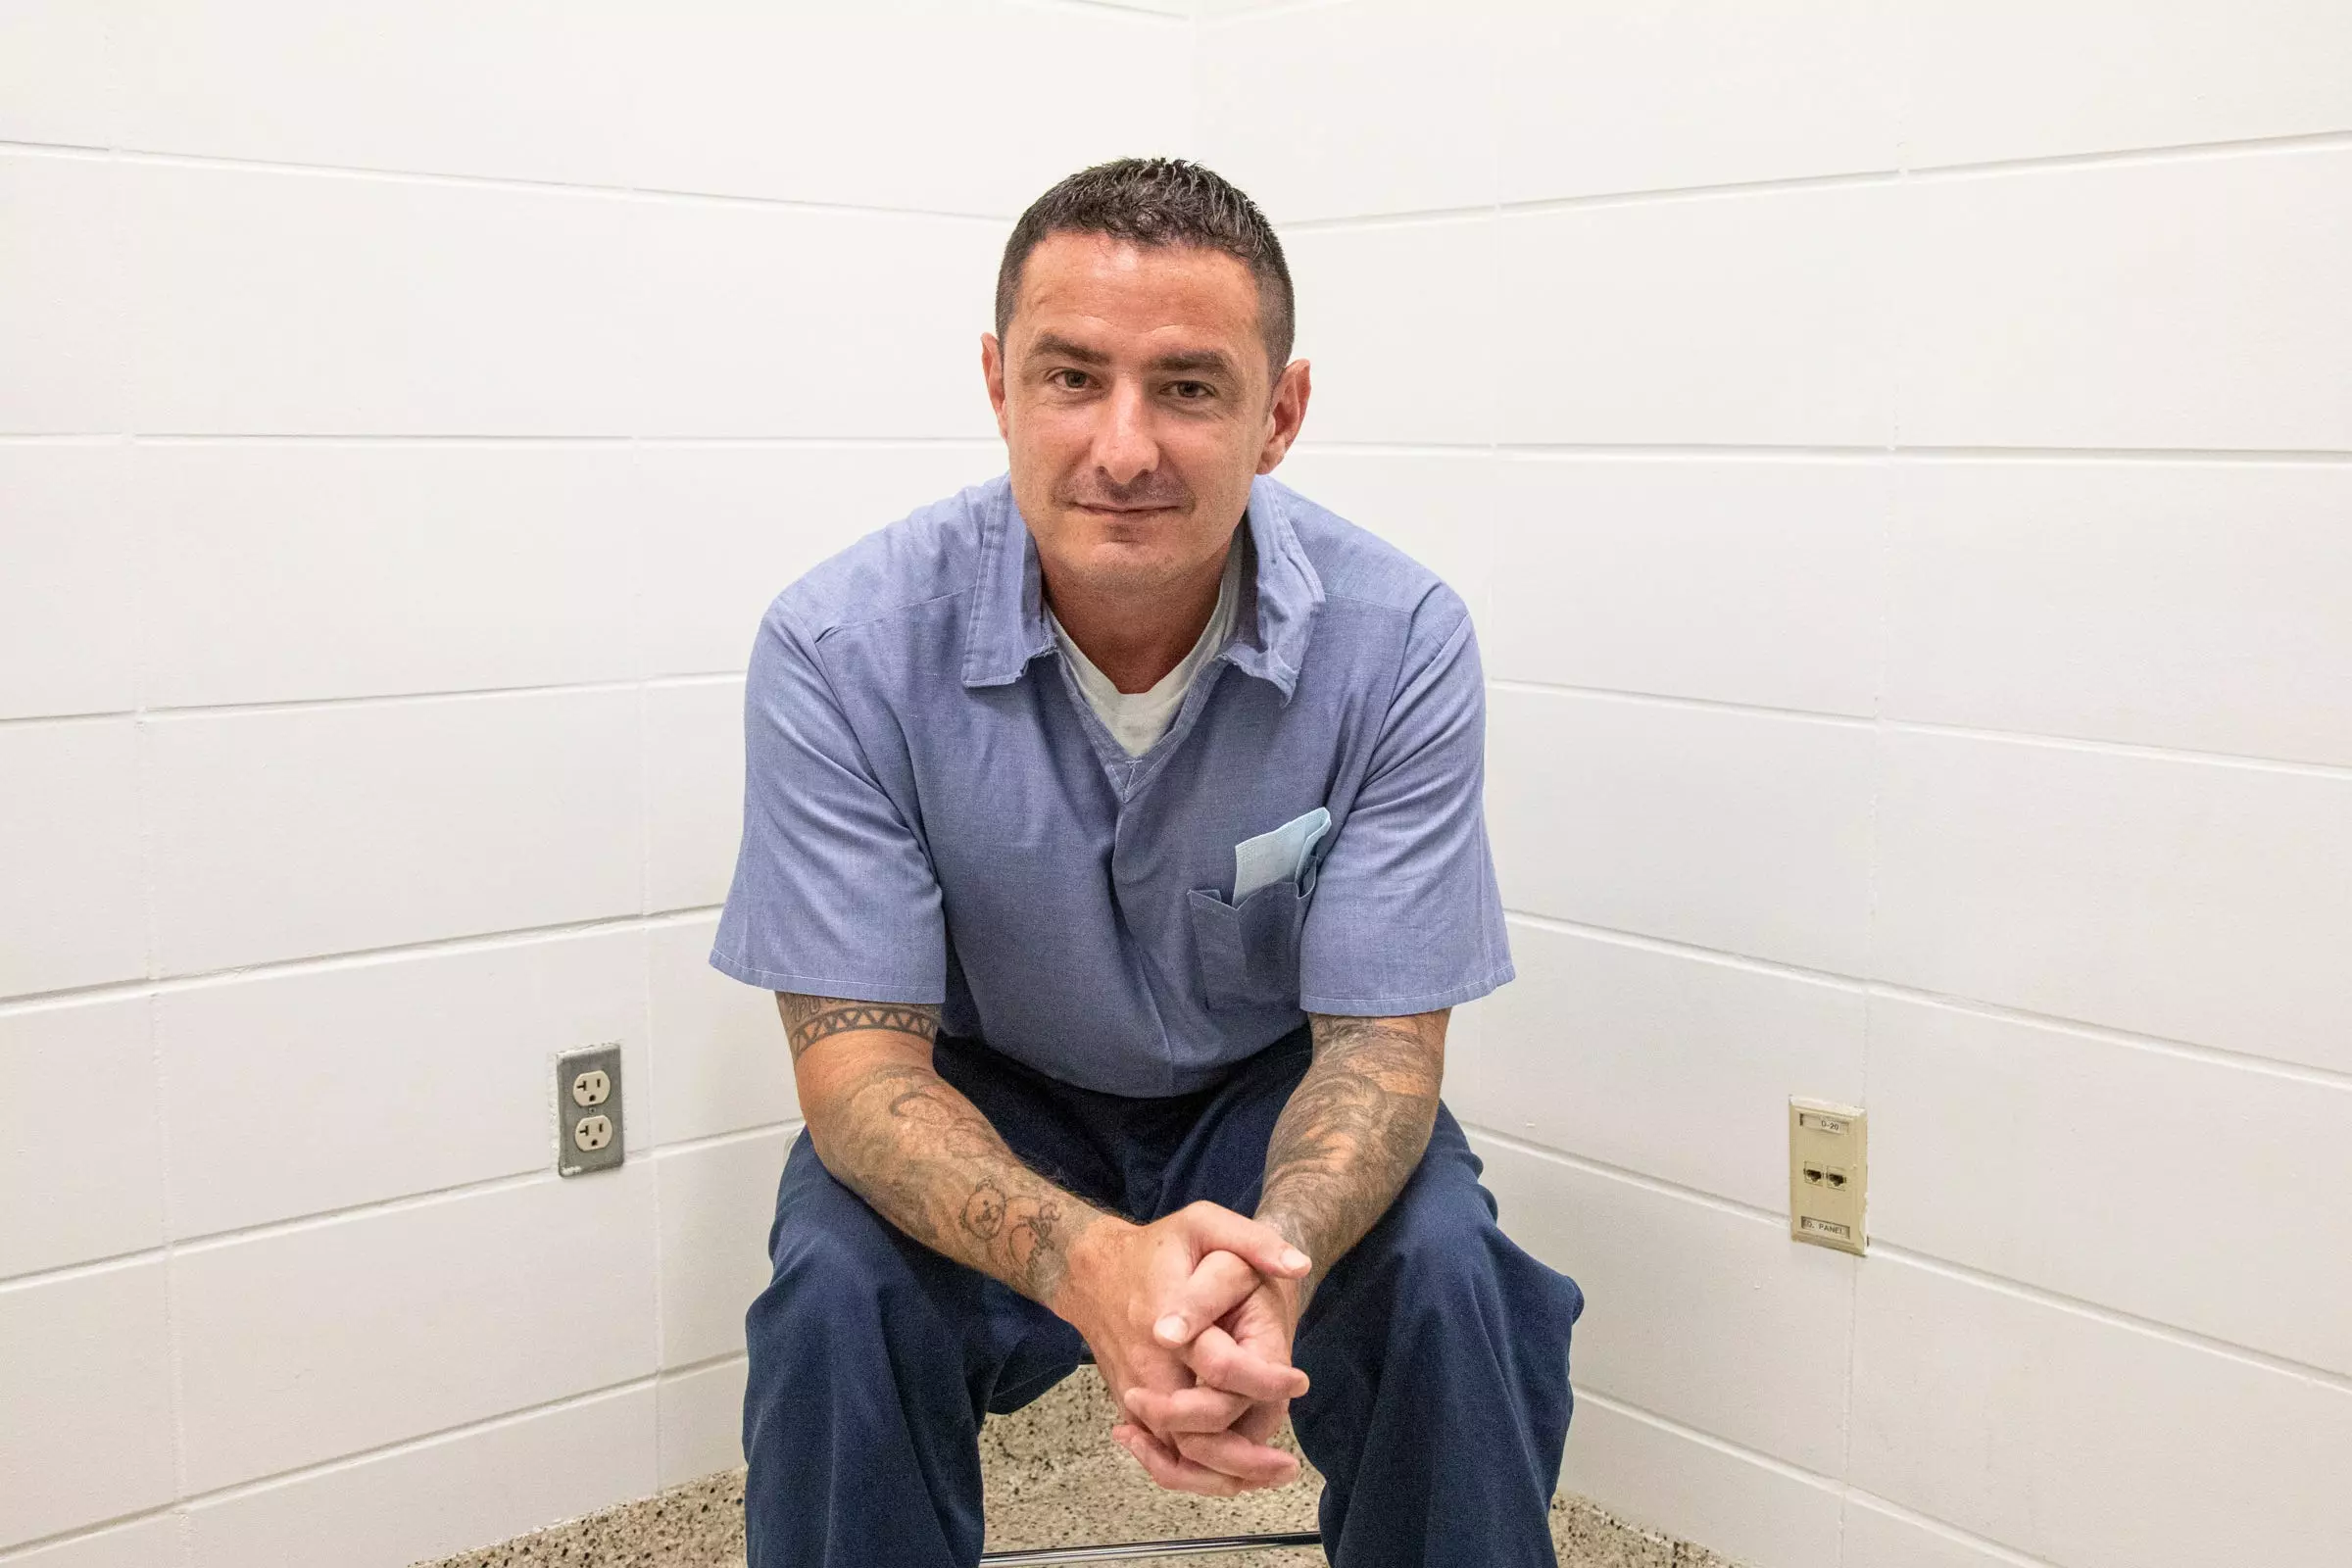 Robert Sheets doesn’t feel like he is being given a fair chance after the board denied his parole request last fall. Sheets, along with Robert Daniel II and Eloise Sheets, was incarcerated after the killing of Abby Worrell and Jamie Kelley nearly 30 years ago.